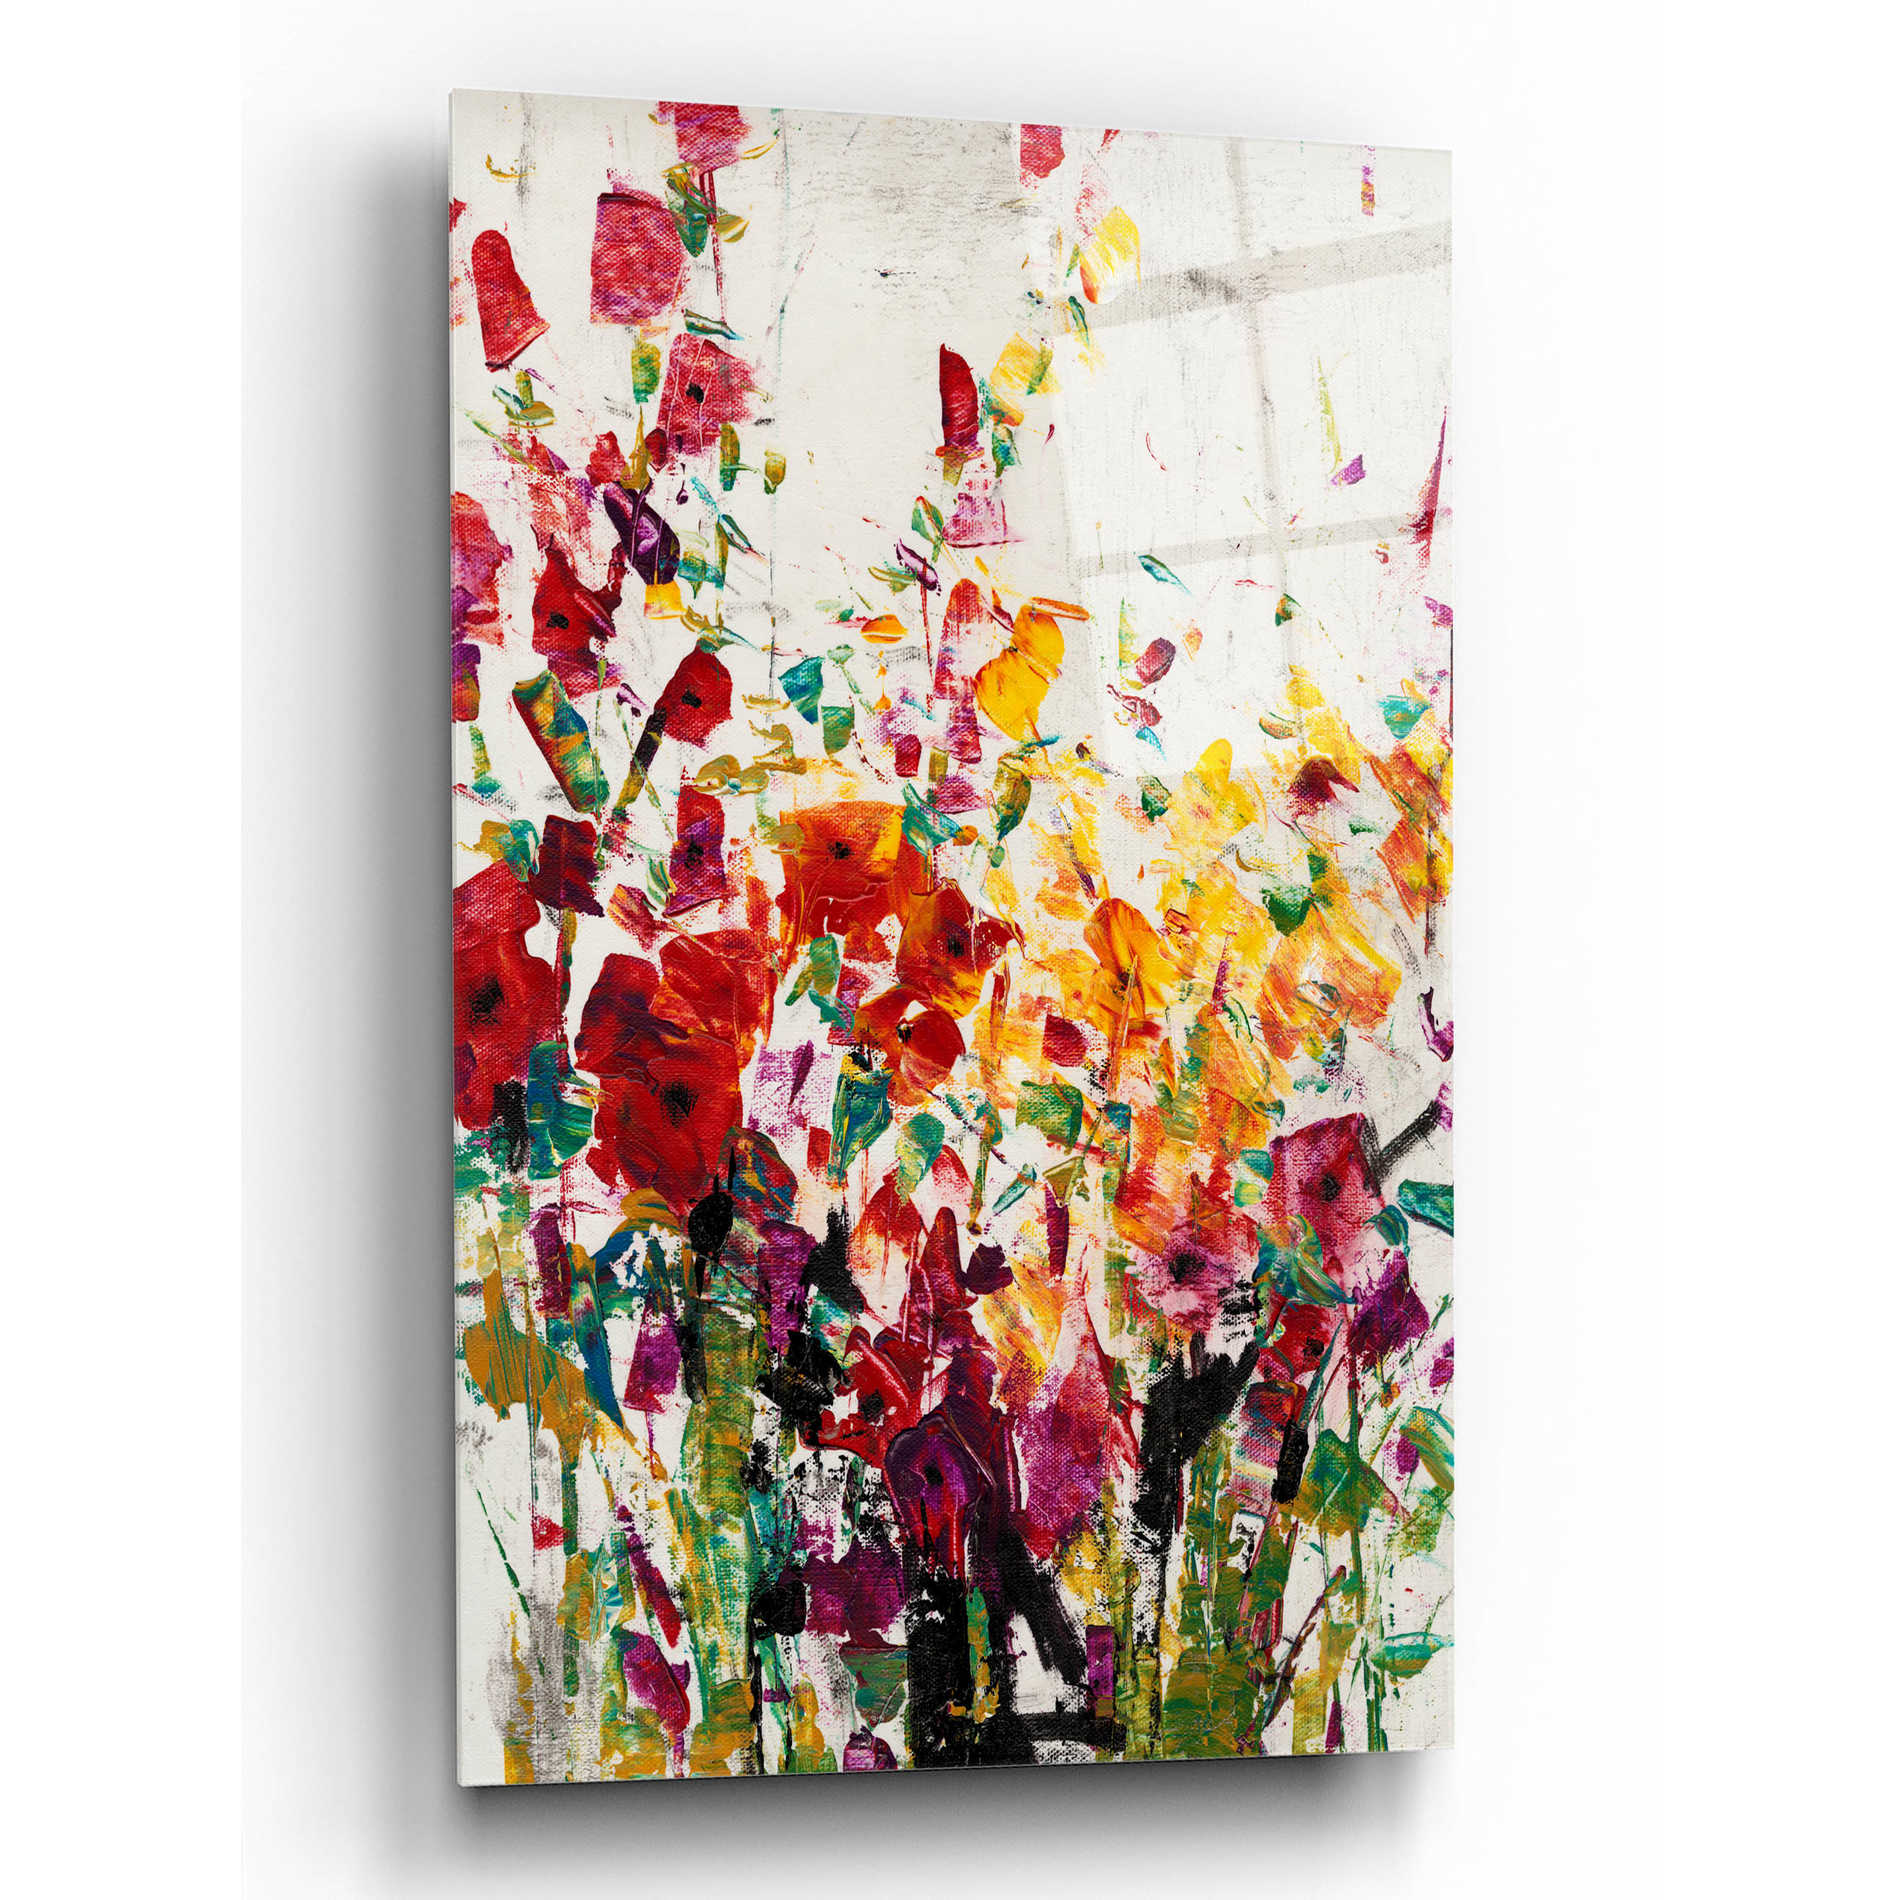 Epic Art 'Wildflowers Blooming I' by Tim O'Toole, Acrylic Glass Wall Art